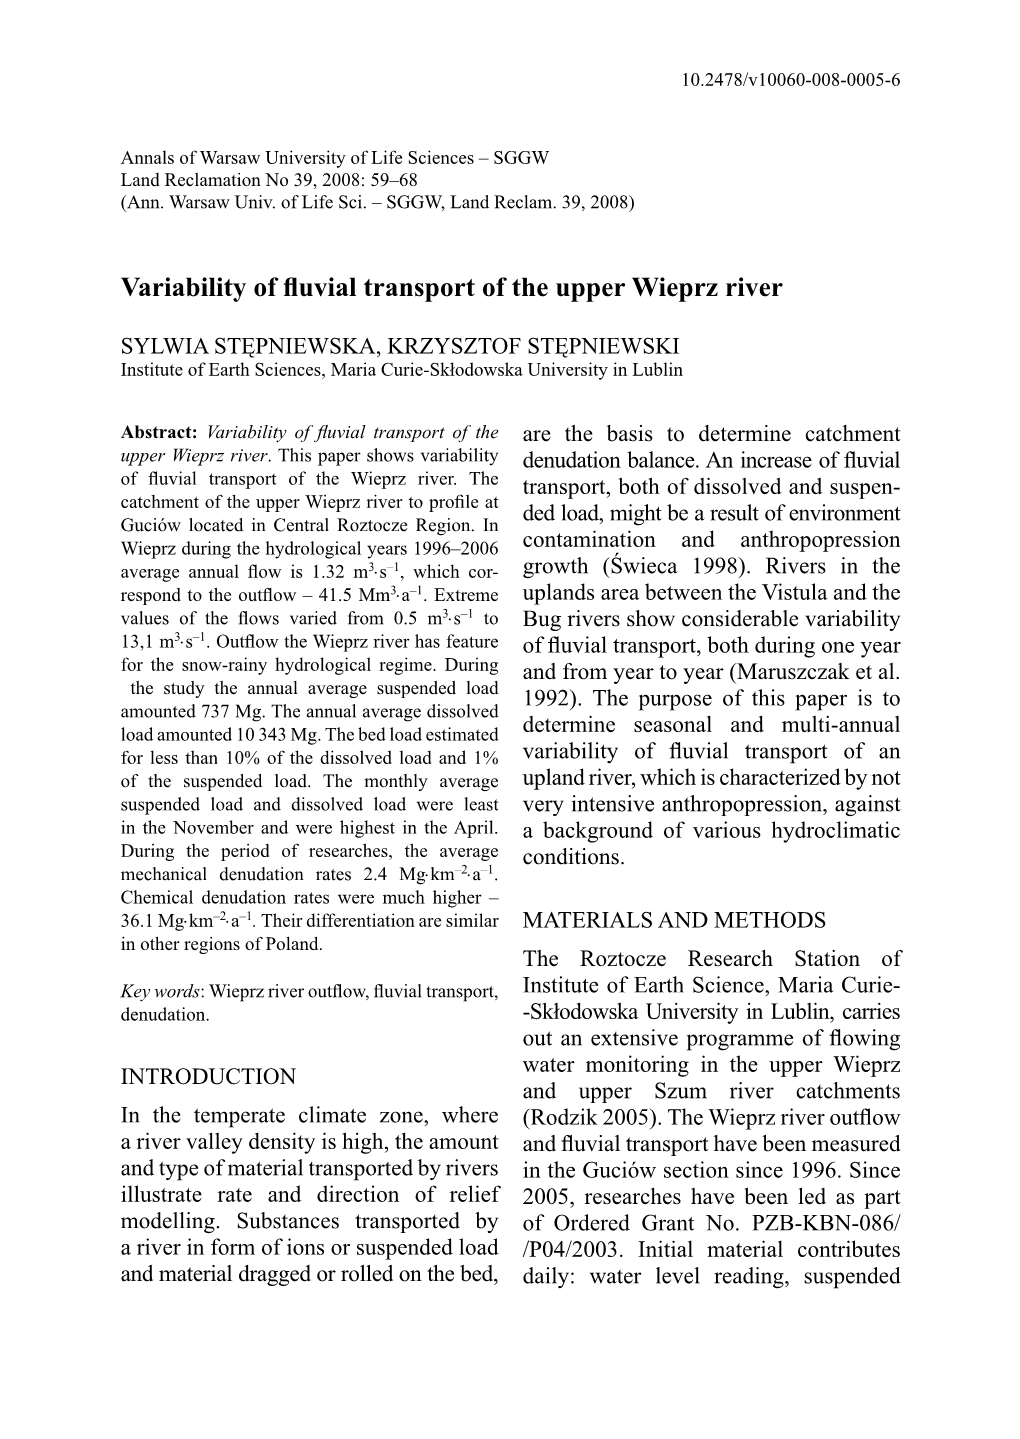 Variability of Fluvial Transport of the Upper Wieprz River